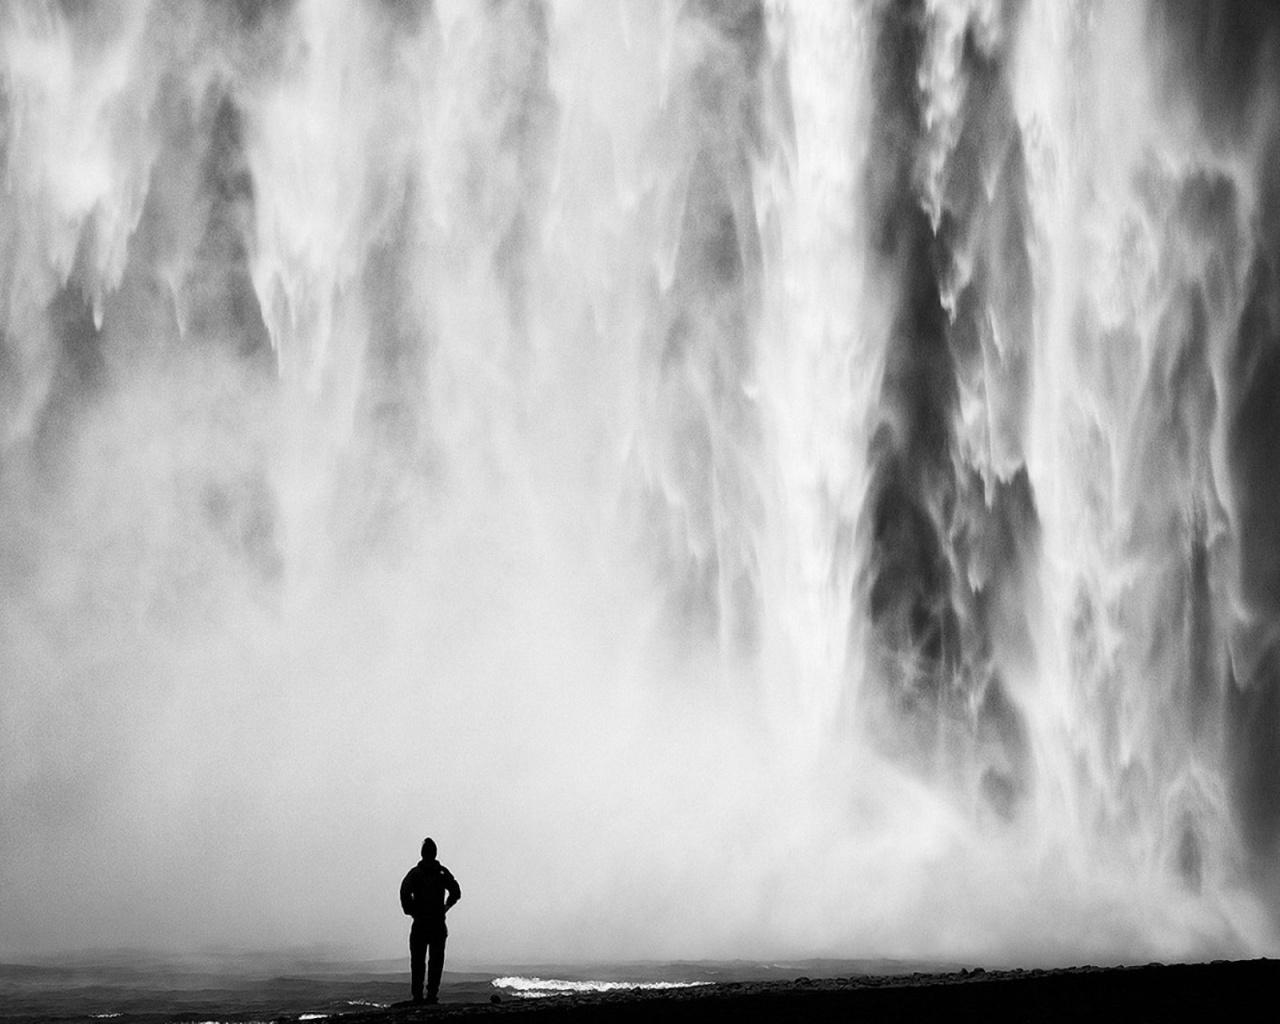 Black and White Waterfall wallpaper. Black and White